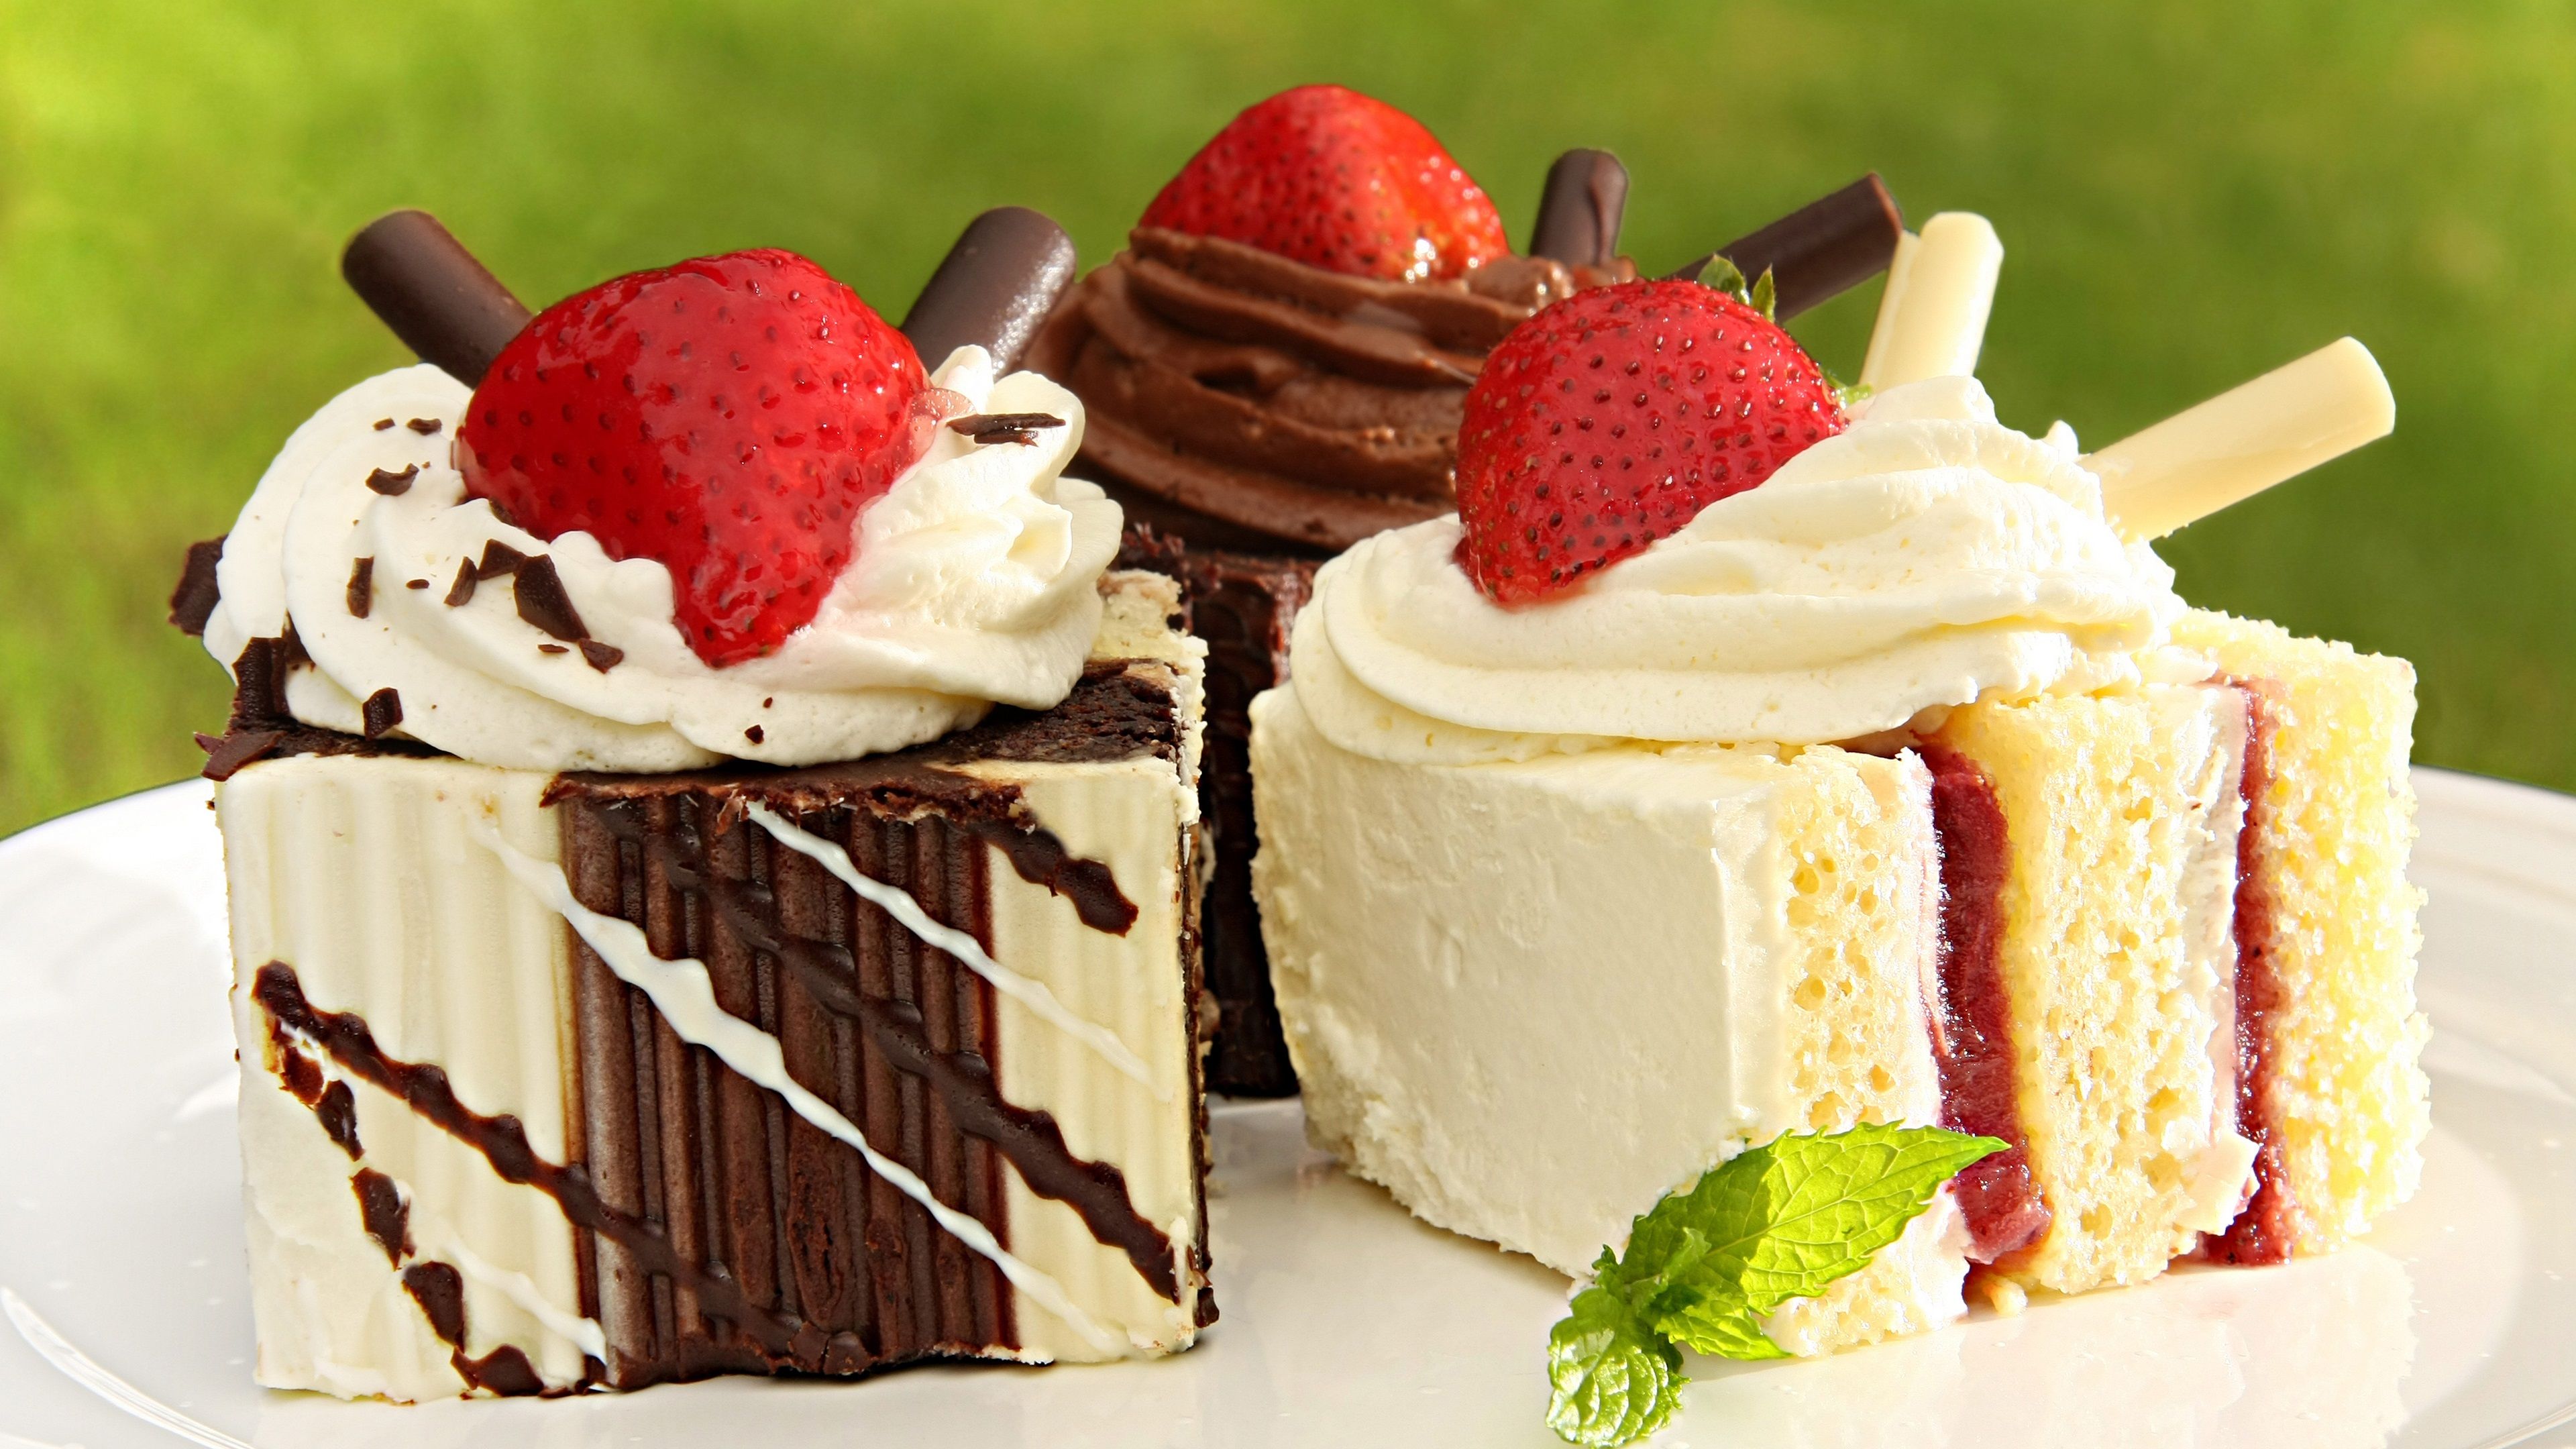 Wallpaper Sweet cakes, cream, strawberries, delicious food 3840x2160 UHD 4K Picture, Image